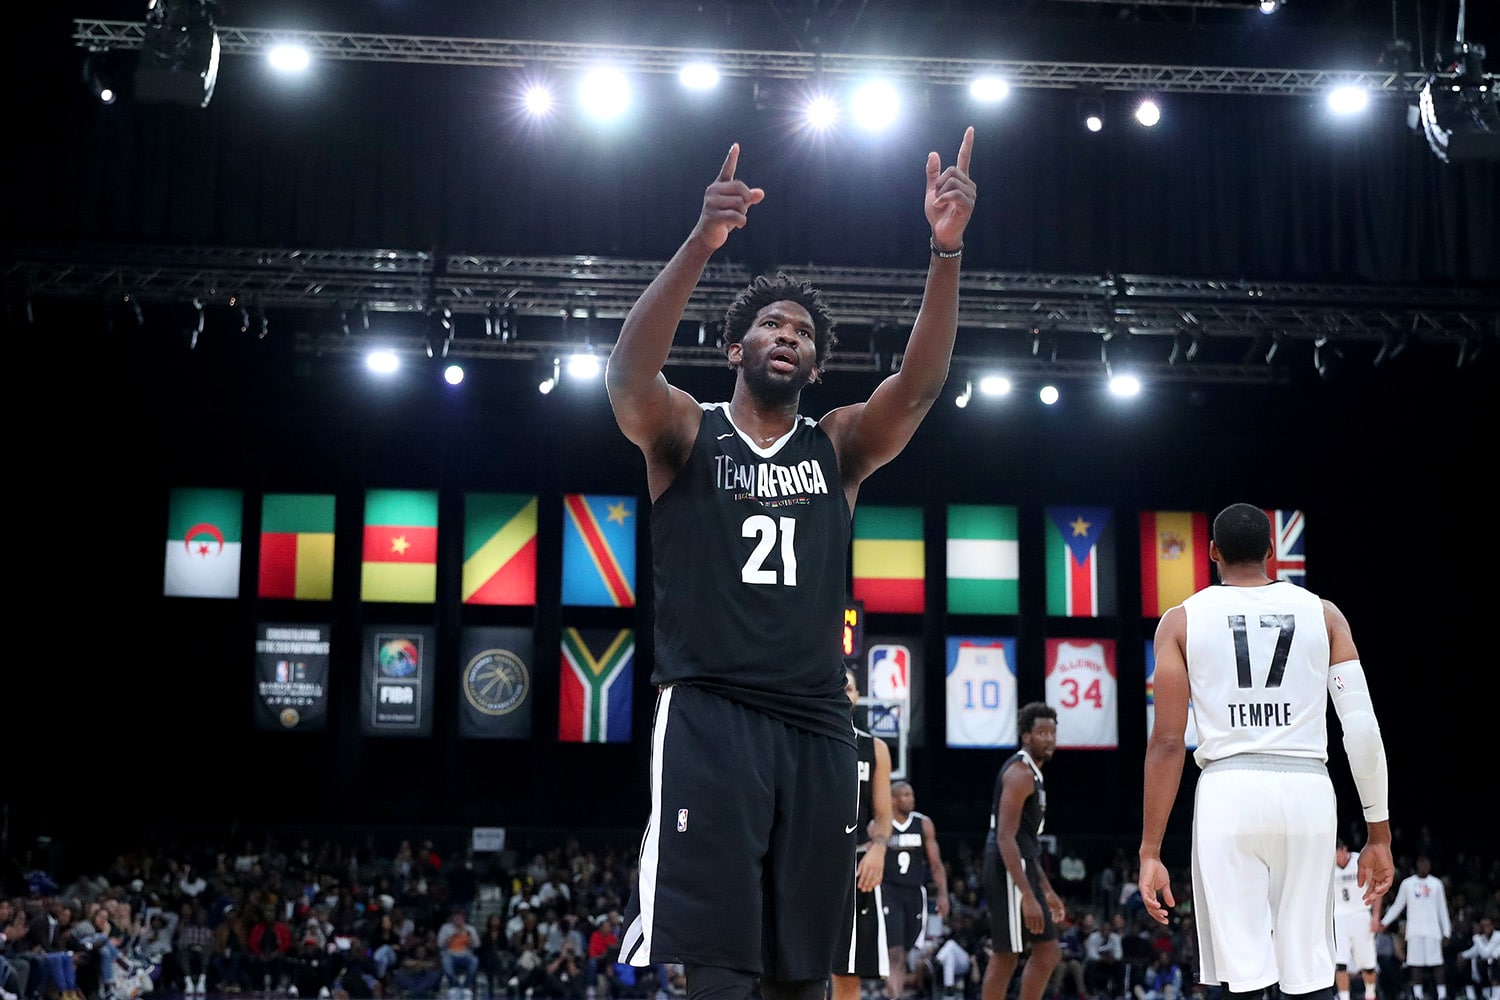 Africa's basketball stars are making their mark on the NBA